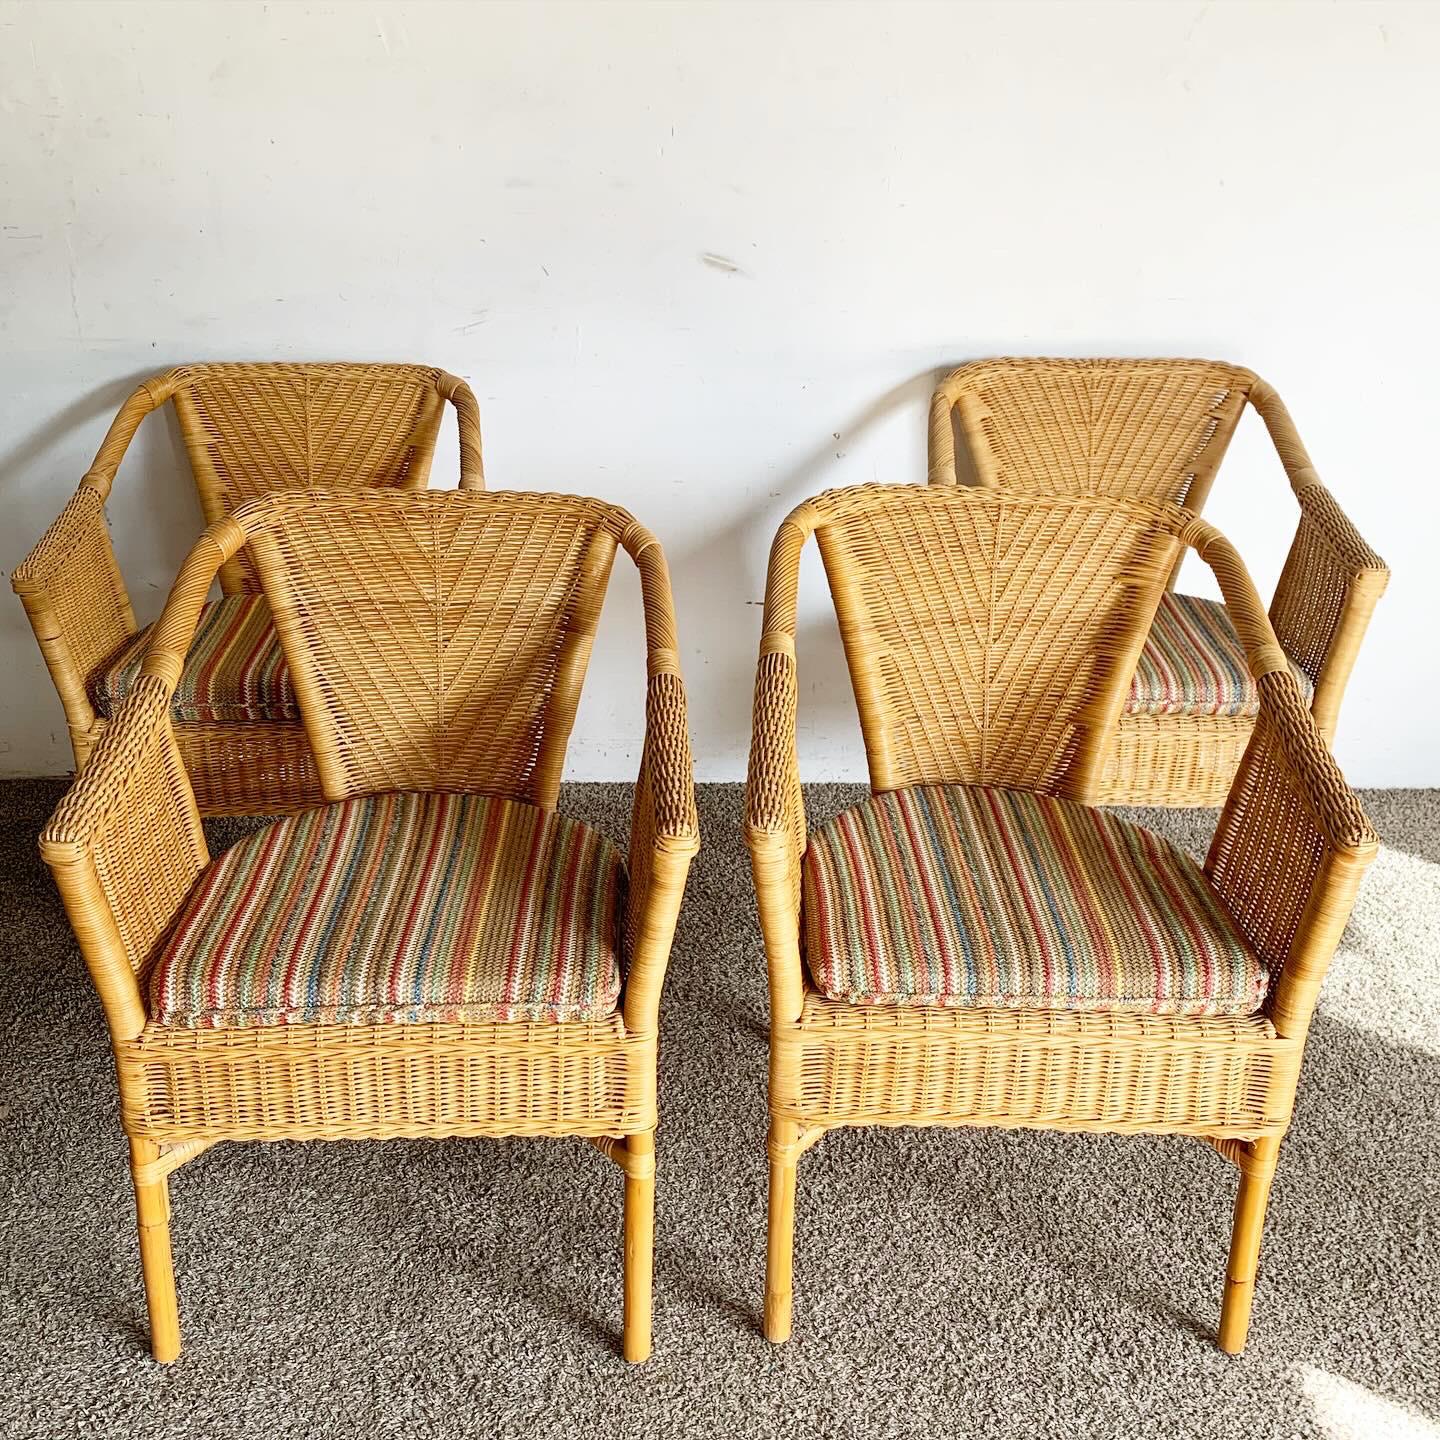 Philippine Boho Chic Wicker and Rattan Dining Arm Chairs - Set of 4 For Sale